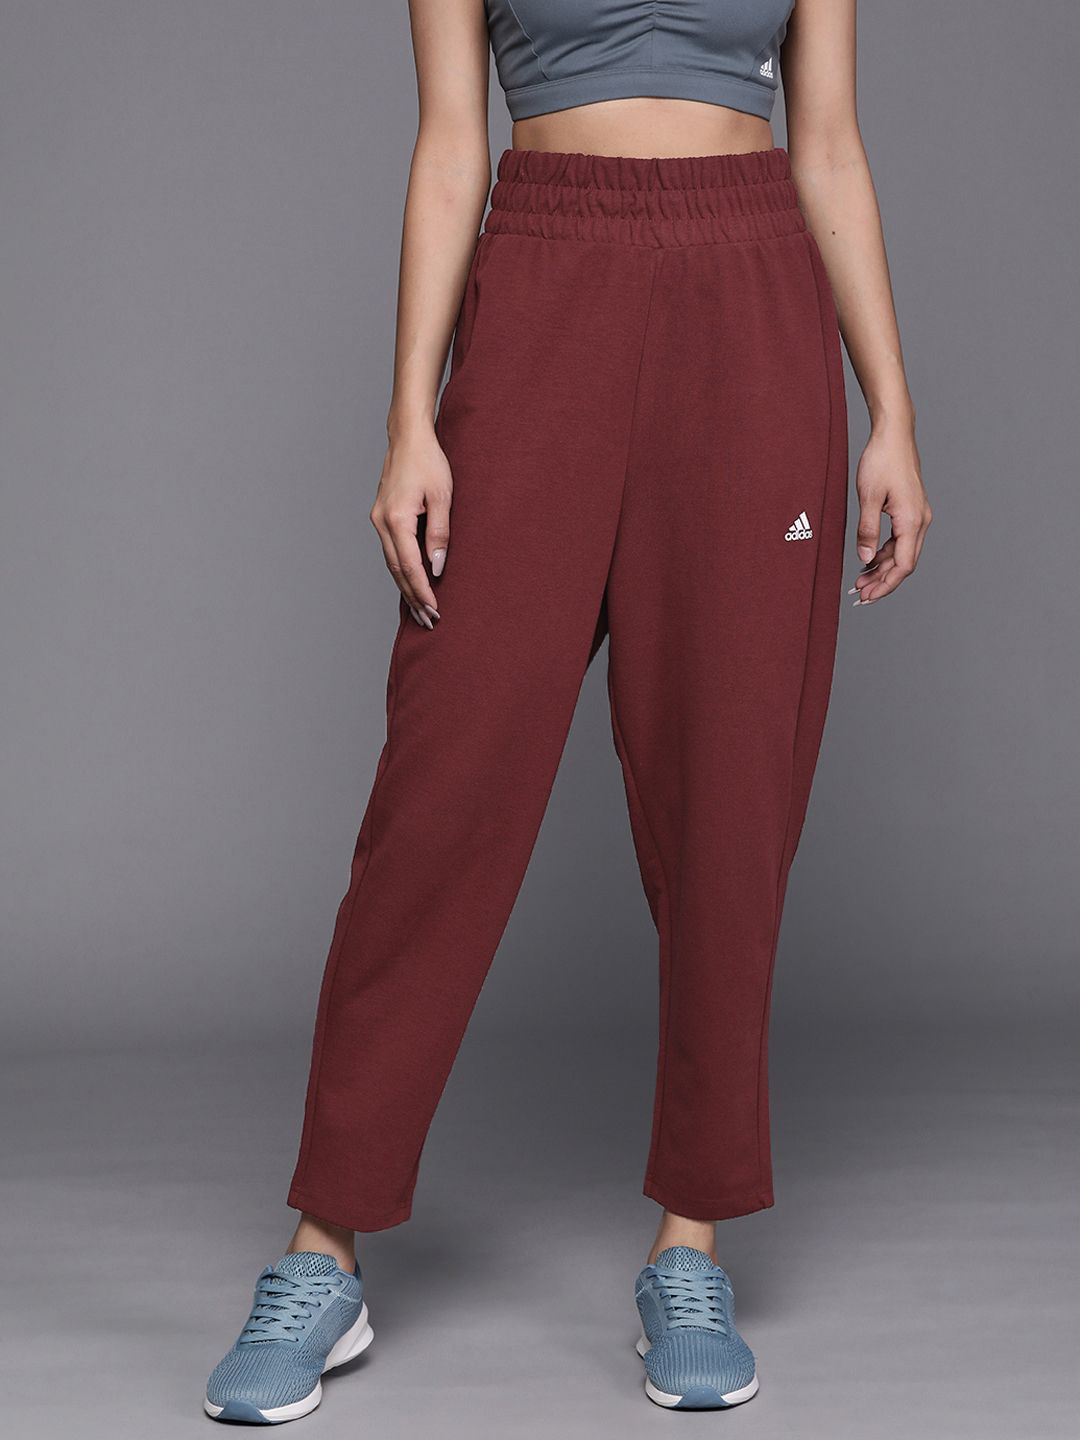 ADIDAS Women Burgundy Solid Training Sustainable Track Pants Price in India